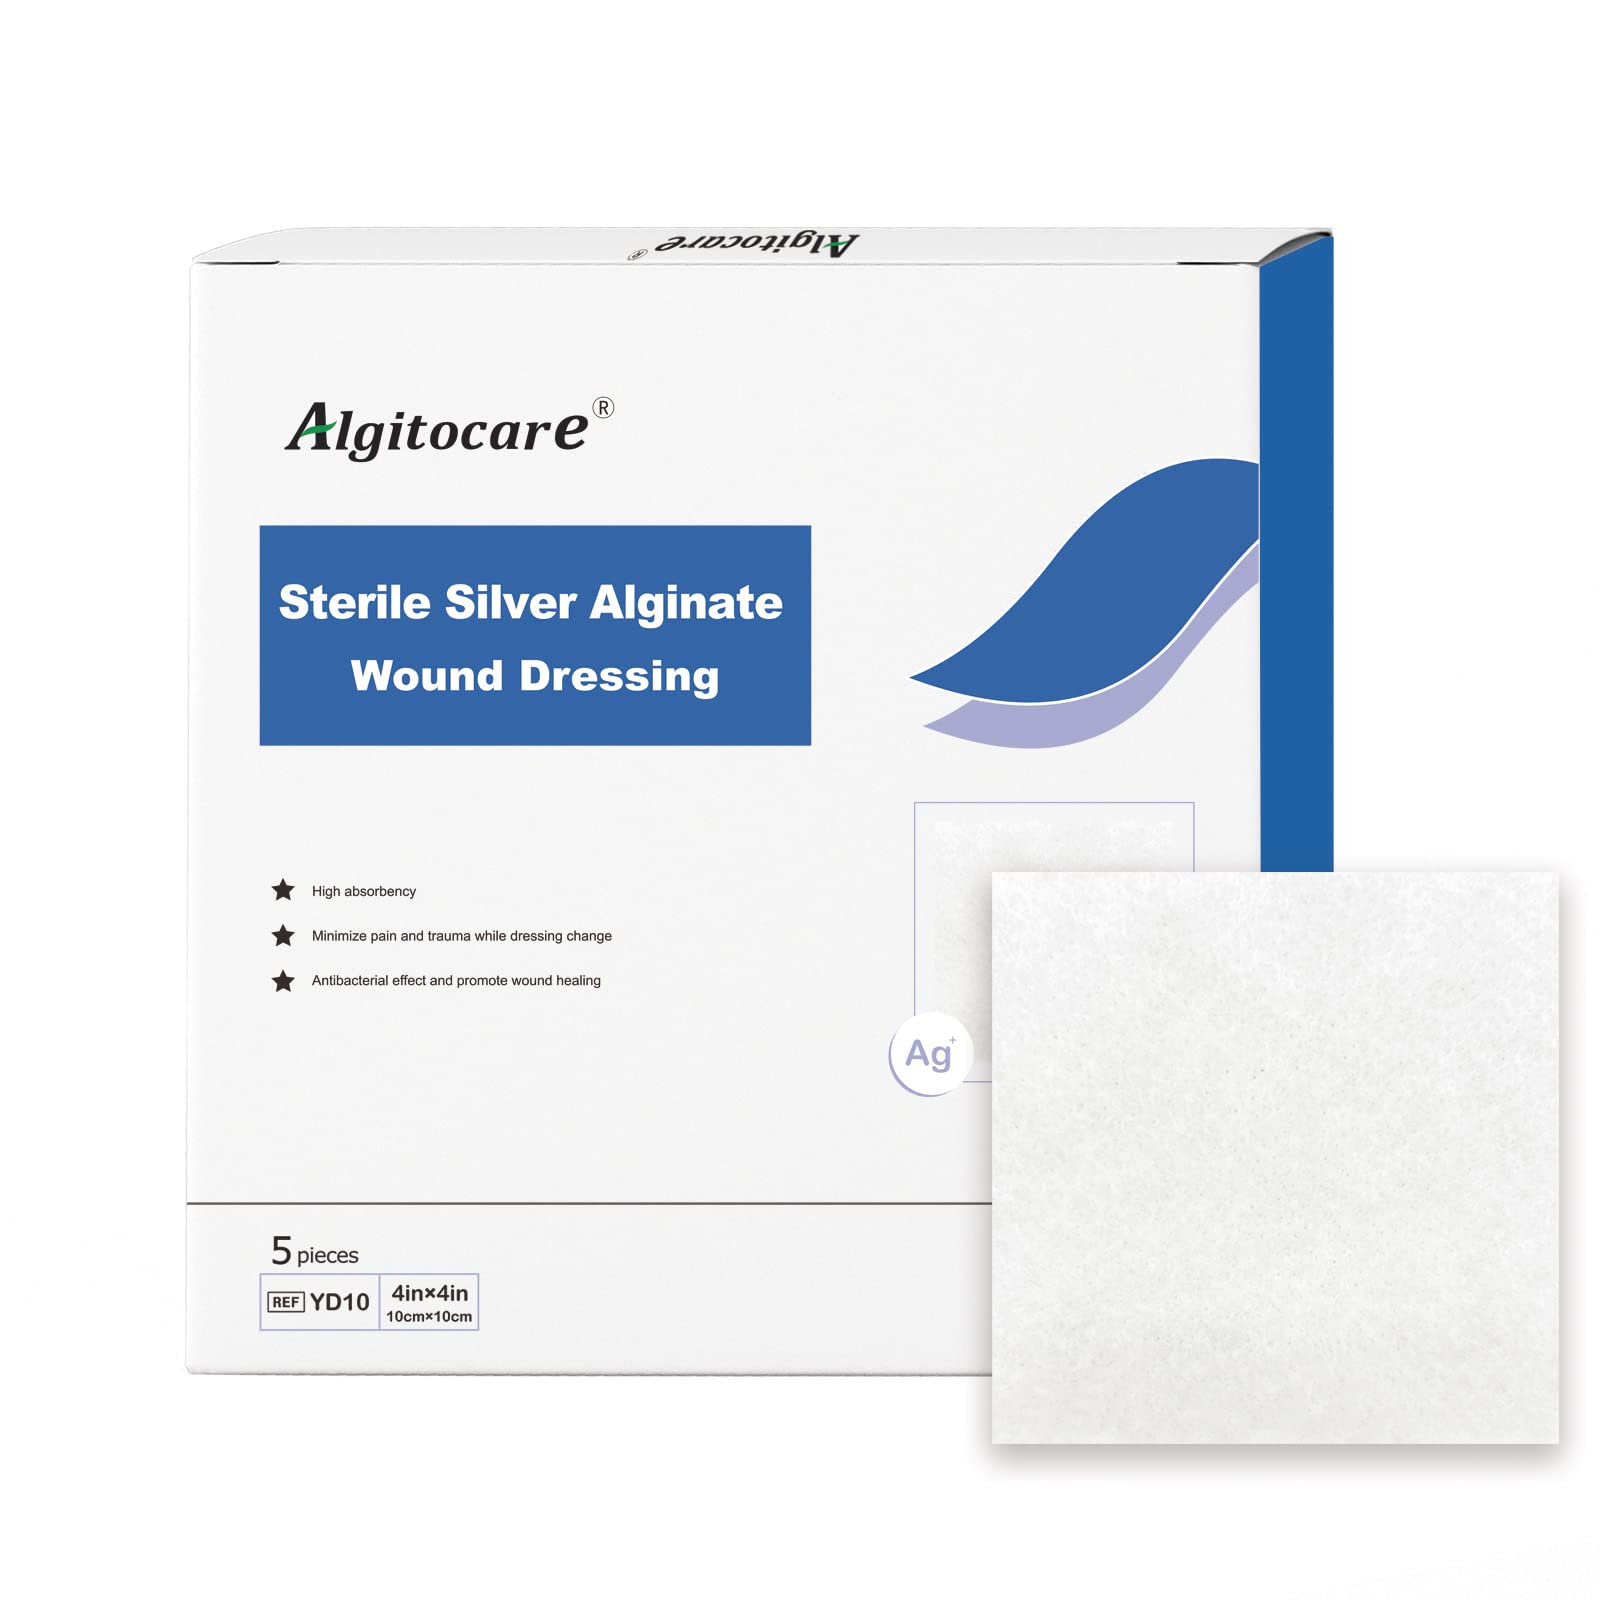 Algitocare Ag Silver Calcium Alginate Wound Dressing - 4"x4"(Pack of 5), Non-Stick Sterile Gauze Pads for Accelerating Wound Healing, High Absorbency and Soft for Wound Care Supplies …